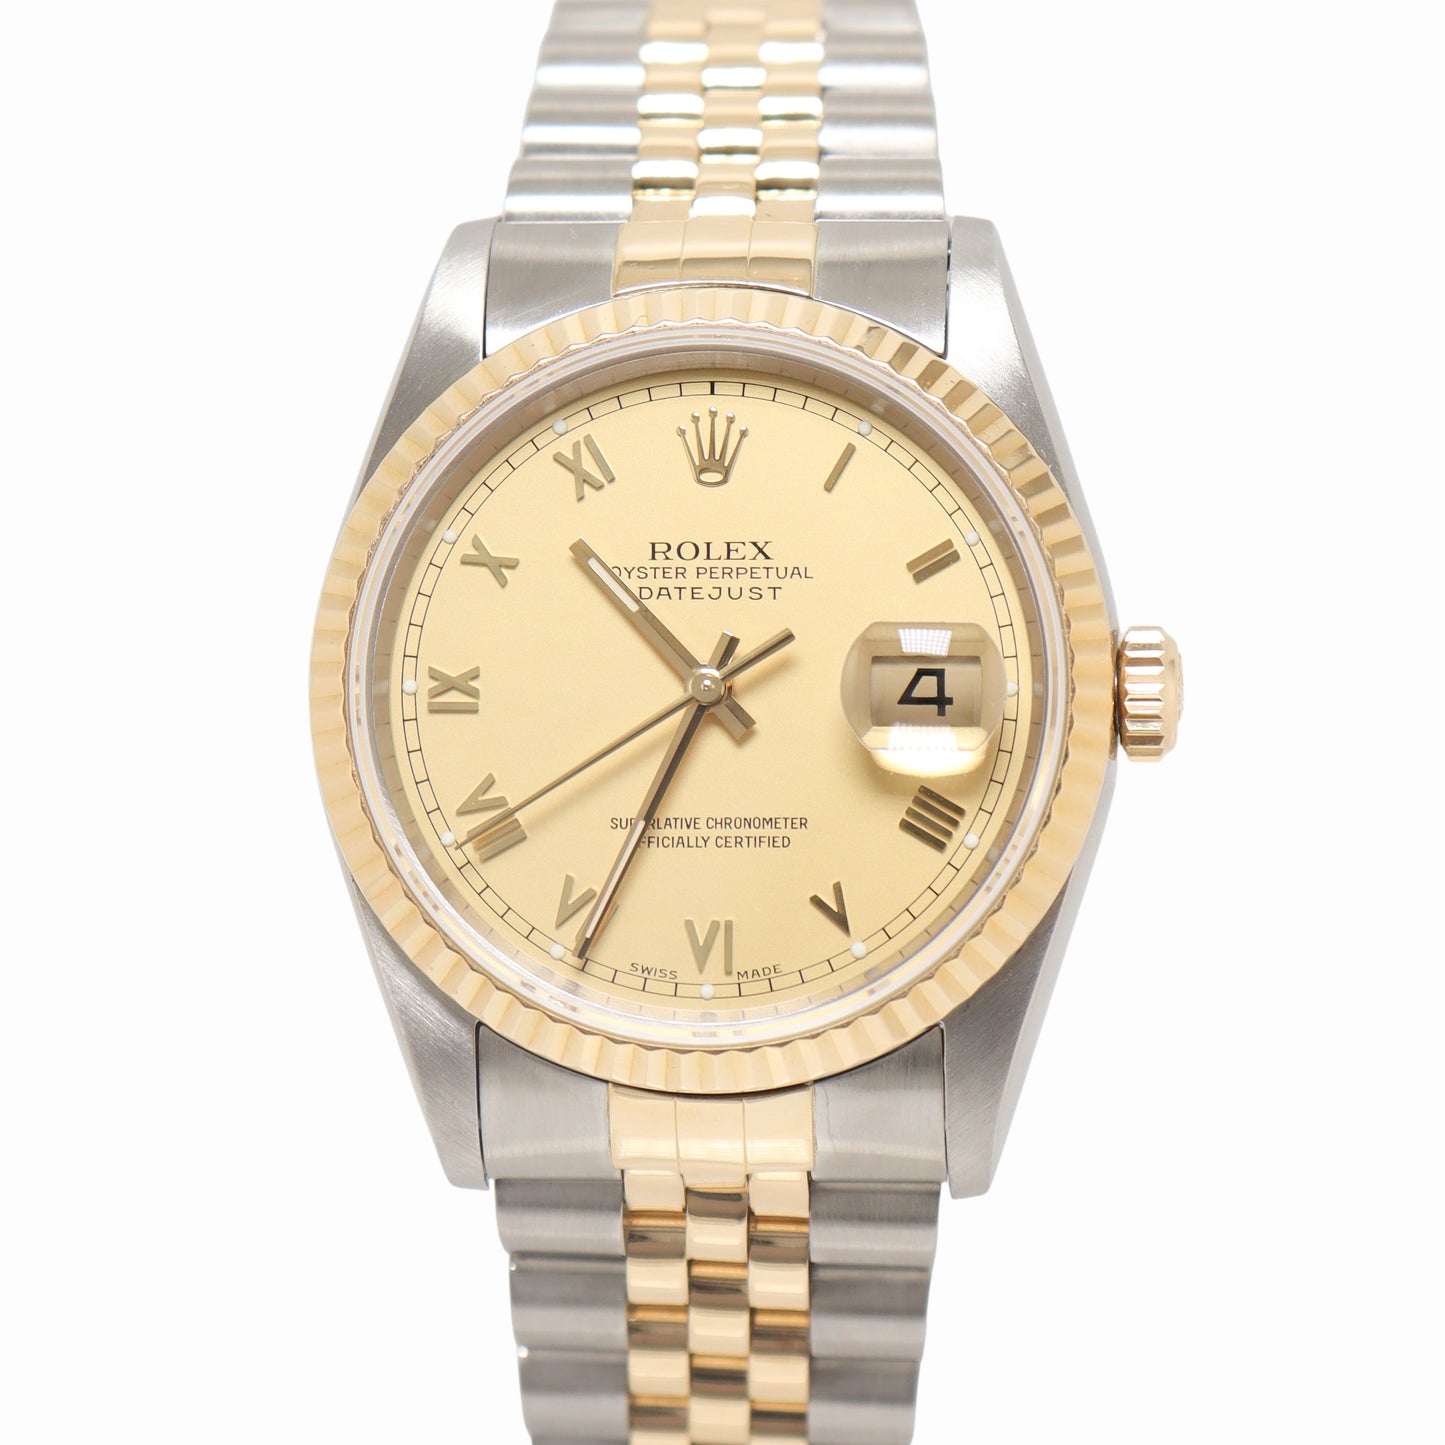 Rolex Datejust 36mm Yellow Gold & Stainless Steel Champagne Roman Dial Watch Reference# 16233 - Happy Jewelers Fine Jewelry Lifetime Warranty